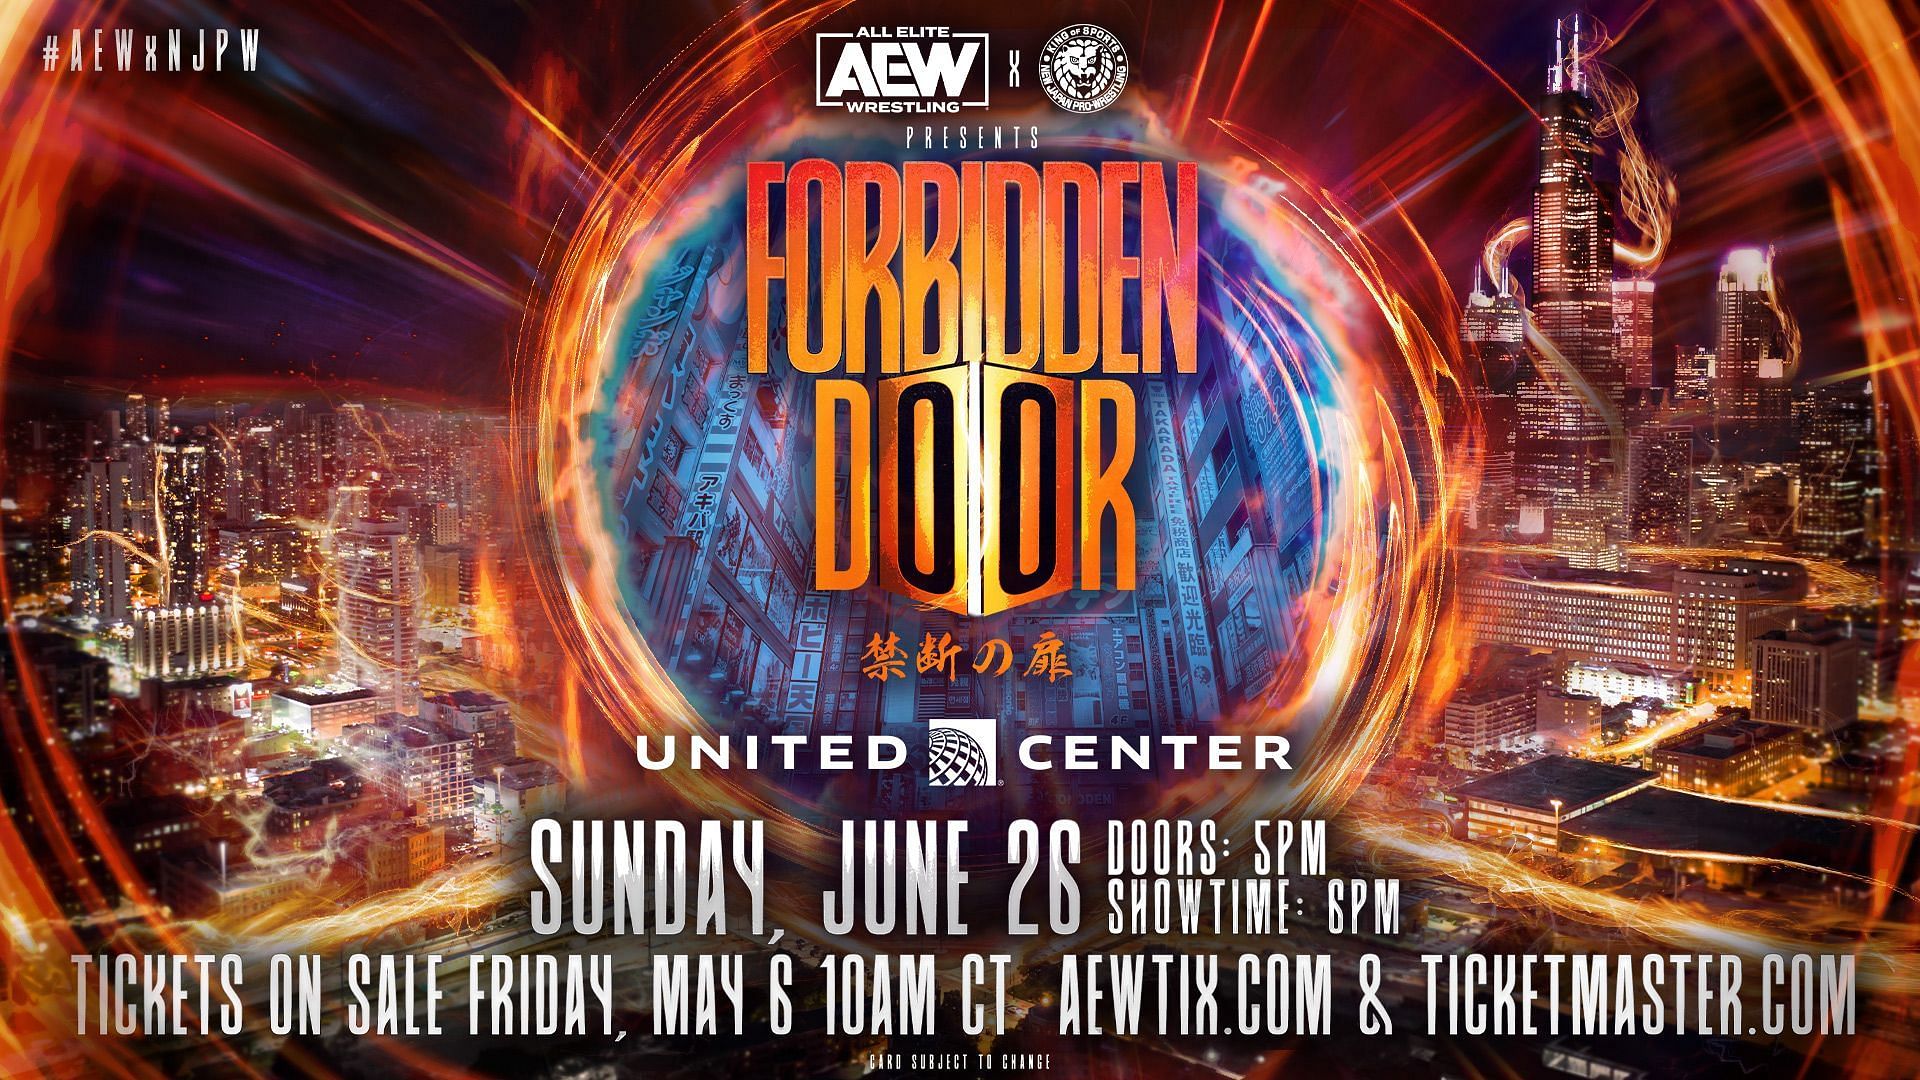 AEW and NJPW will present a supershow this summer